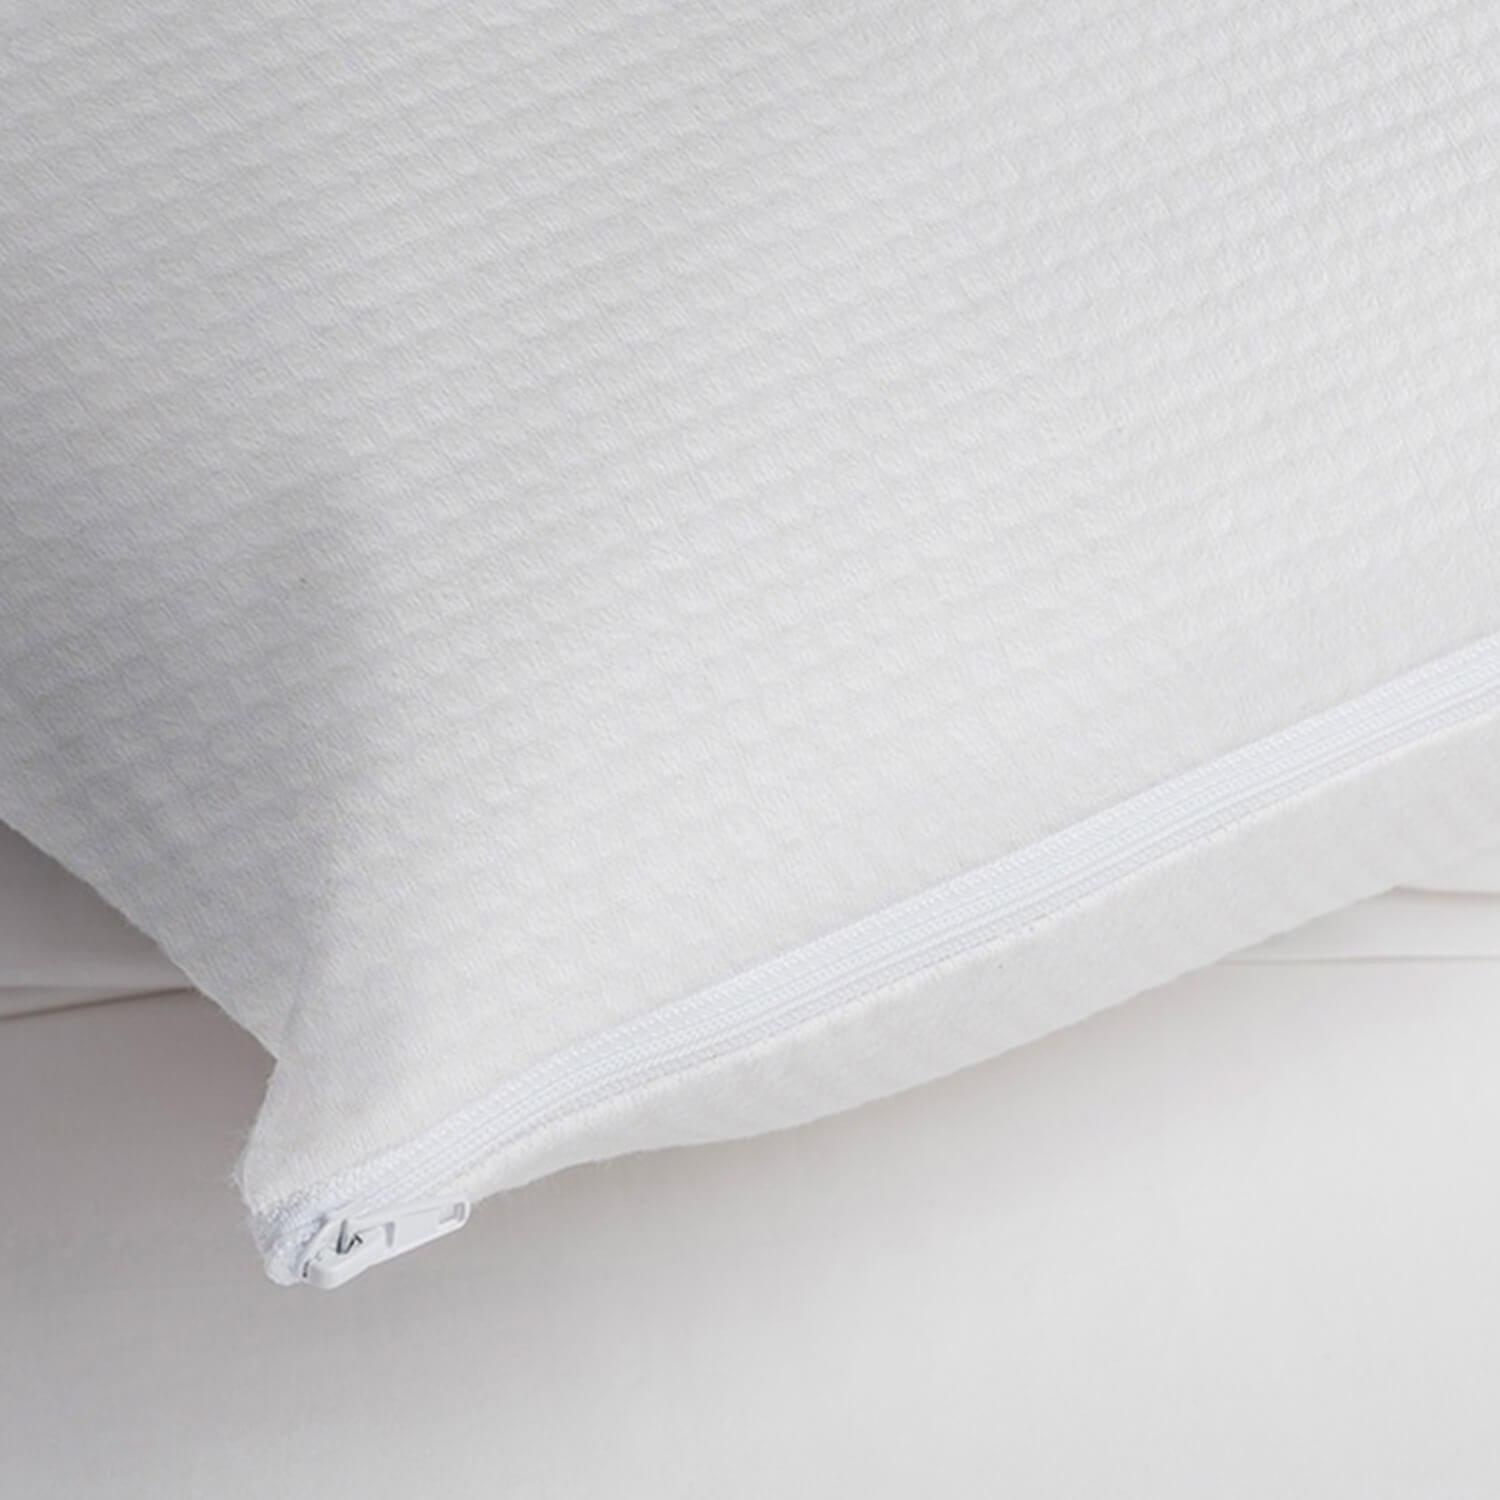 Frost pillow protector